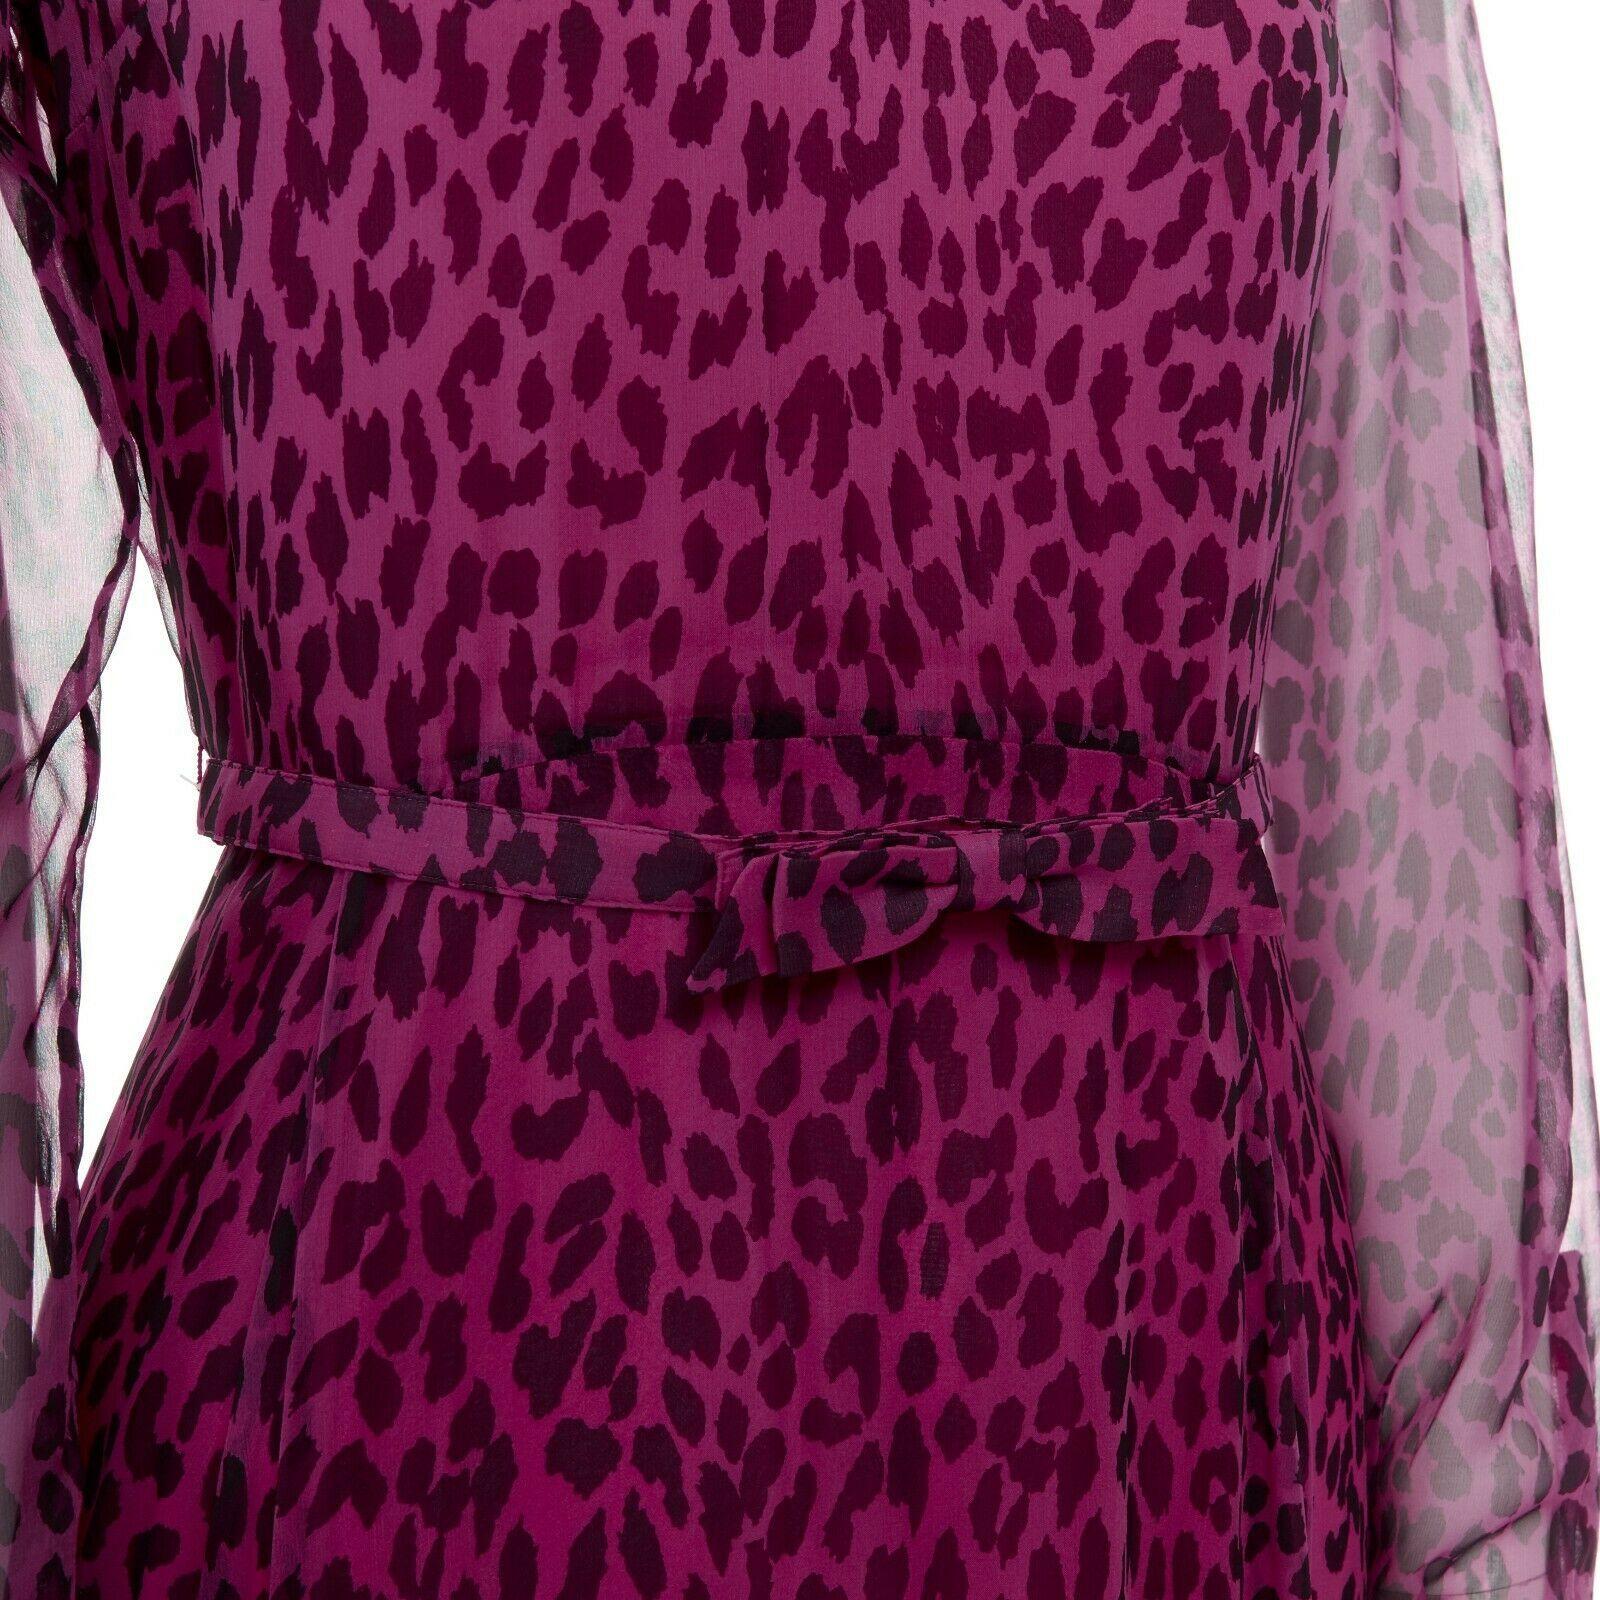 new VALENTINO 2013 pink black leopard silk long sleeves belted evening gown IT40
VALENTINO
FROM THE RESORT 2013 COLLECTION100% silk. 
Pink and black leopard spot print. Round neck. 
Long sleeves. Single button cuff. 
Bow applique skinny belt detail